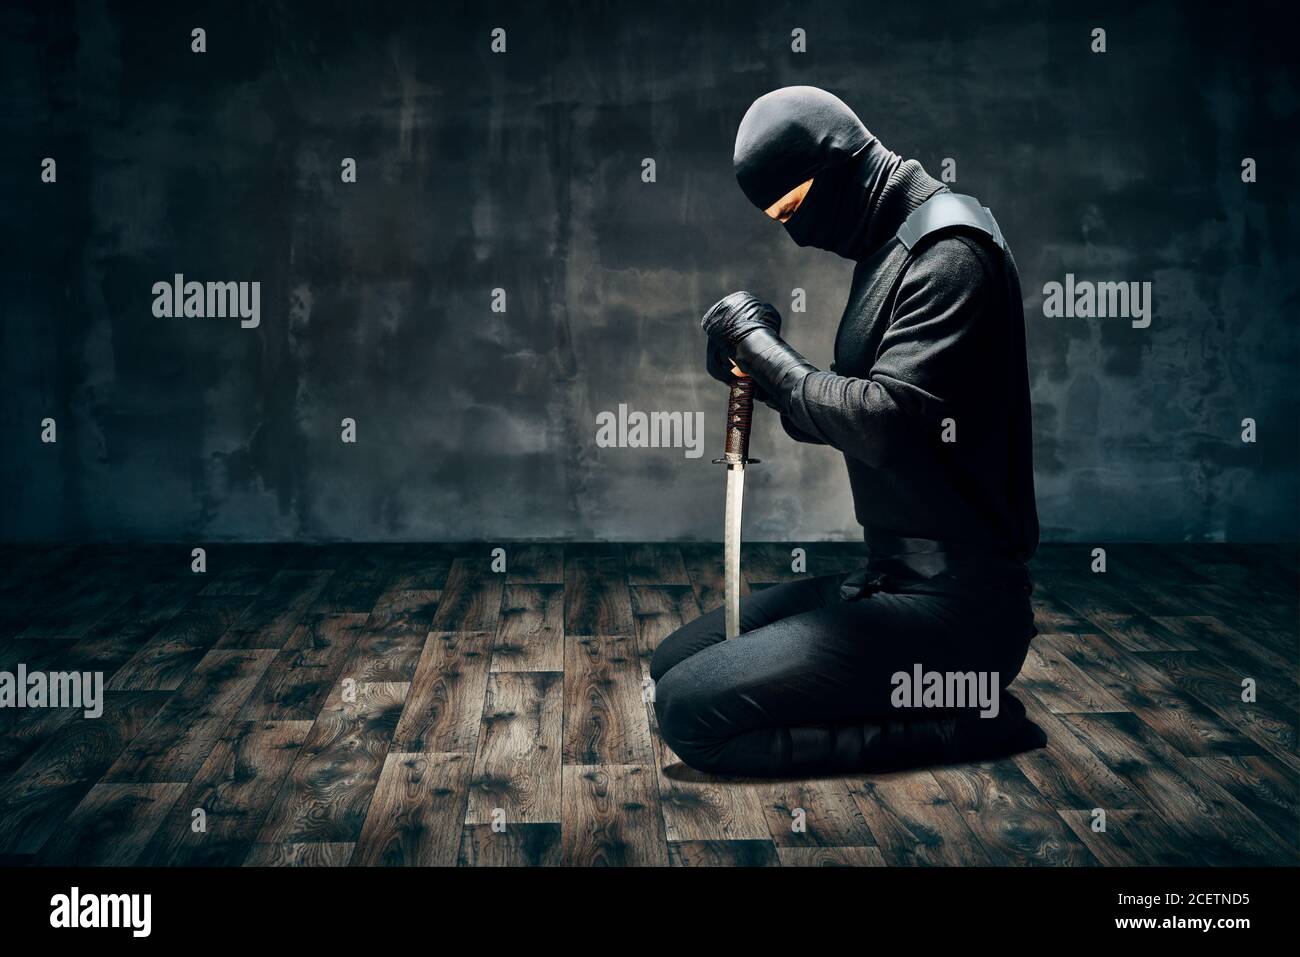 Warrior man sitting on floor posing with a sword over dark background Stock Photo